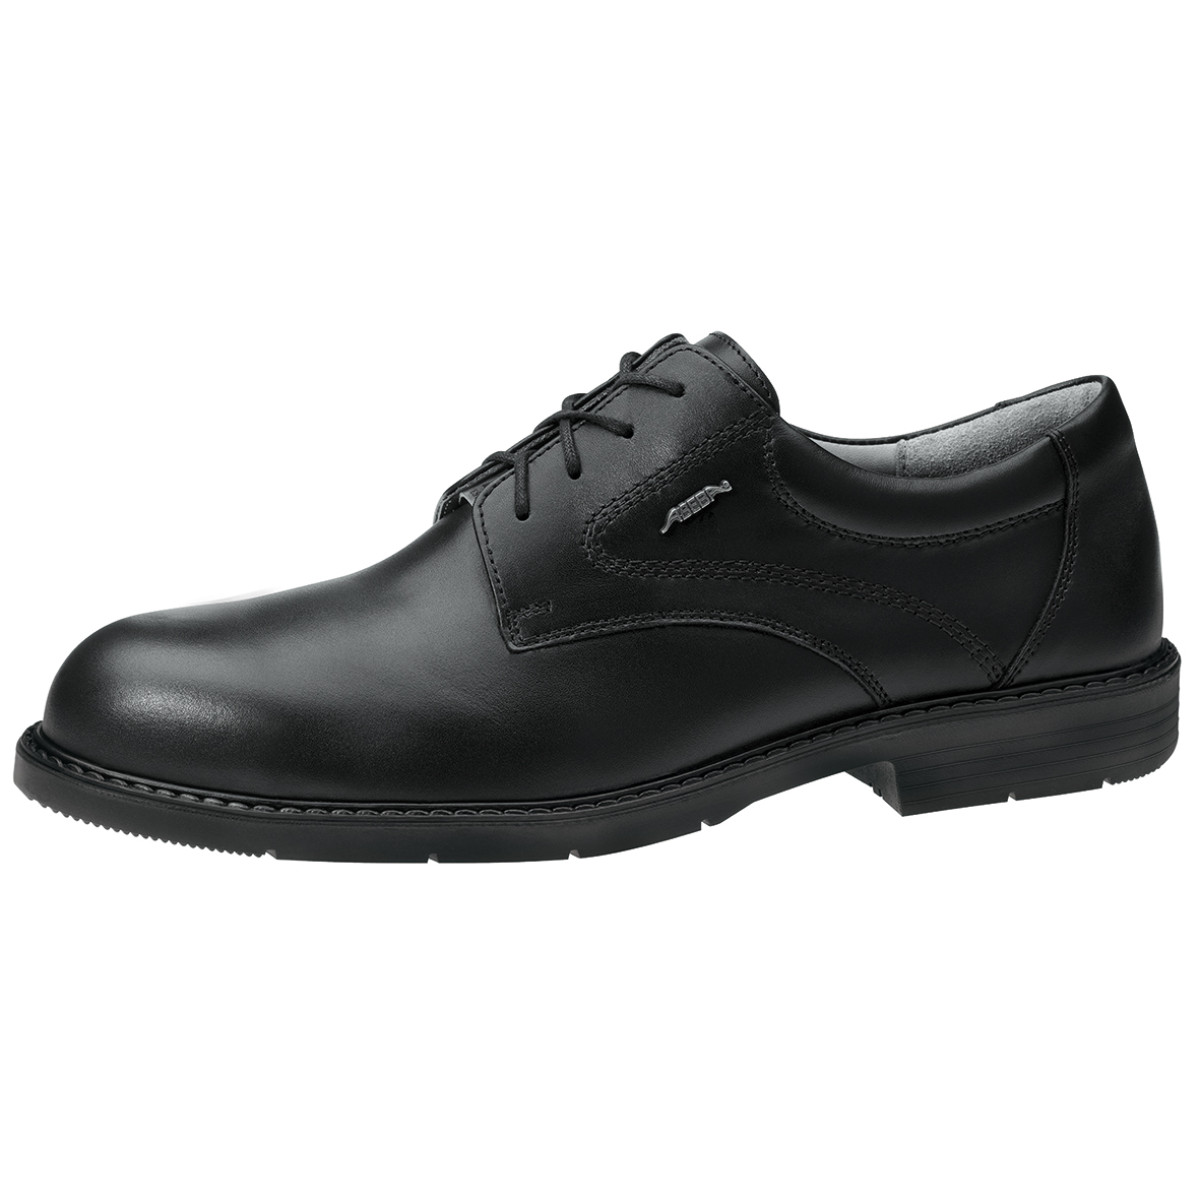 ESD Men's Business - Safety Shoe